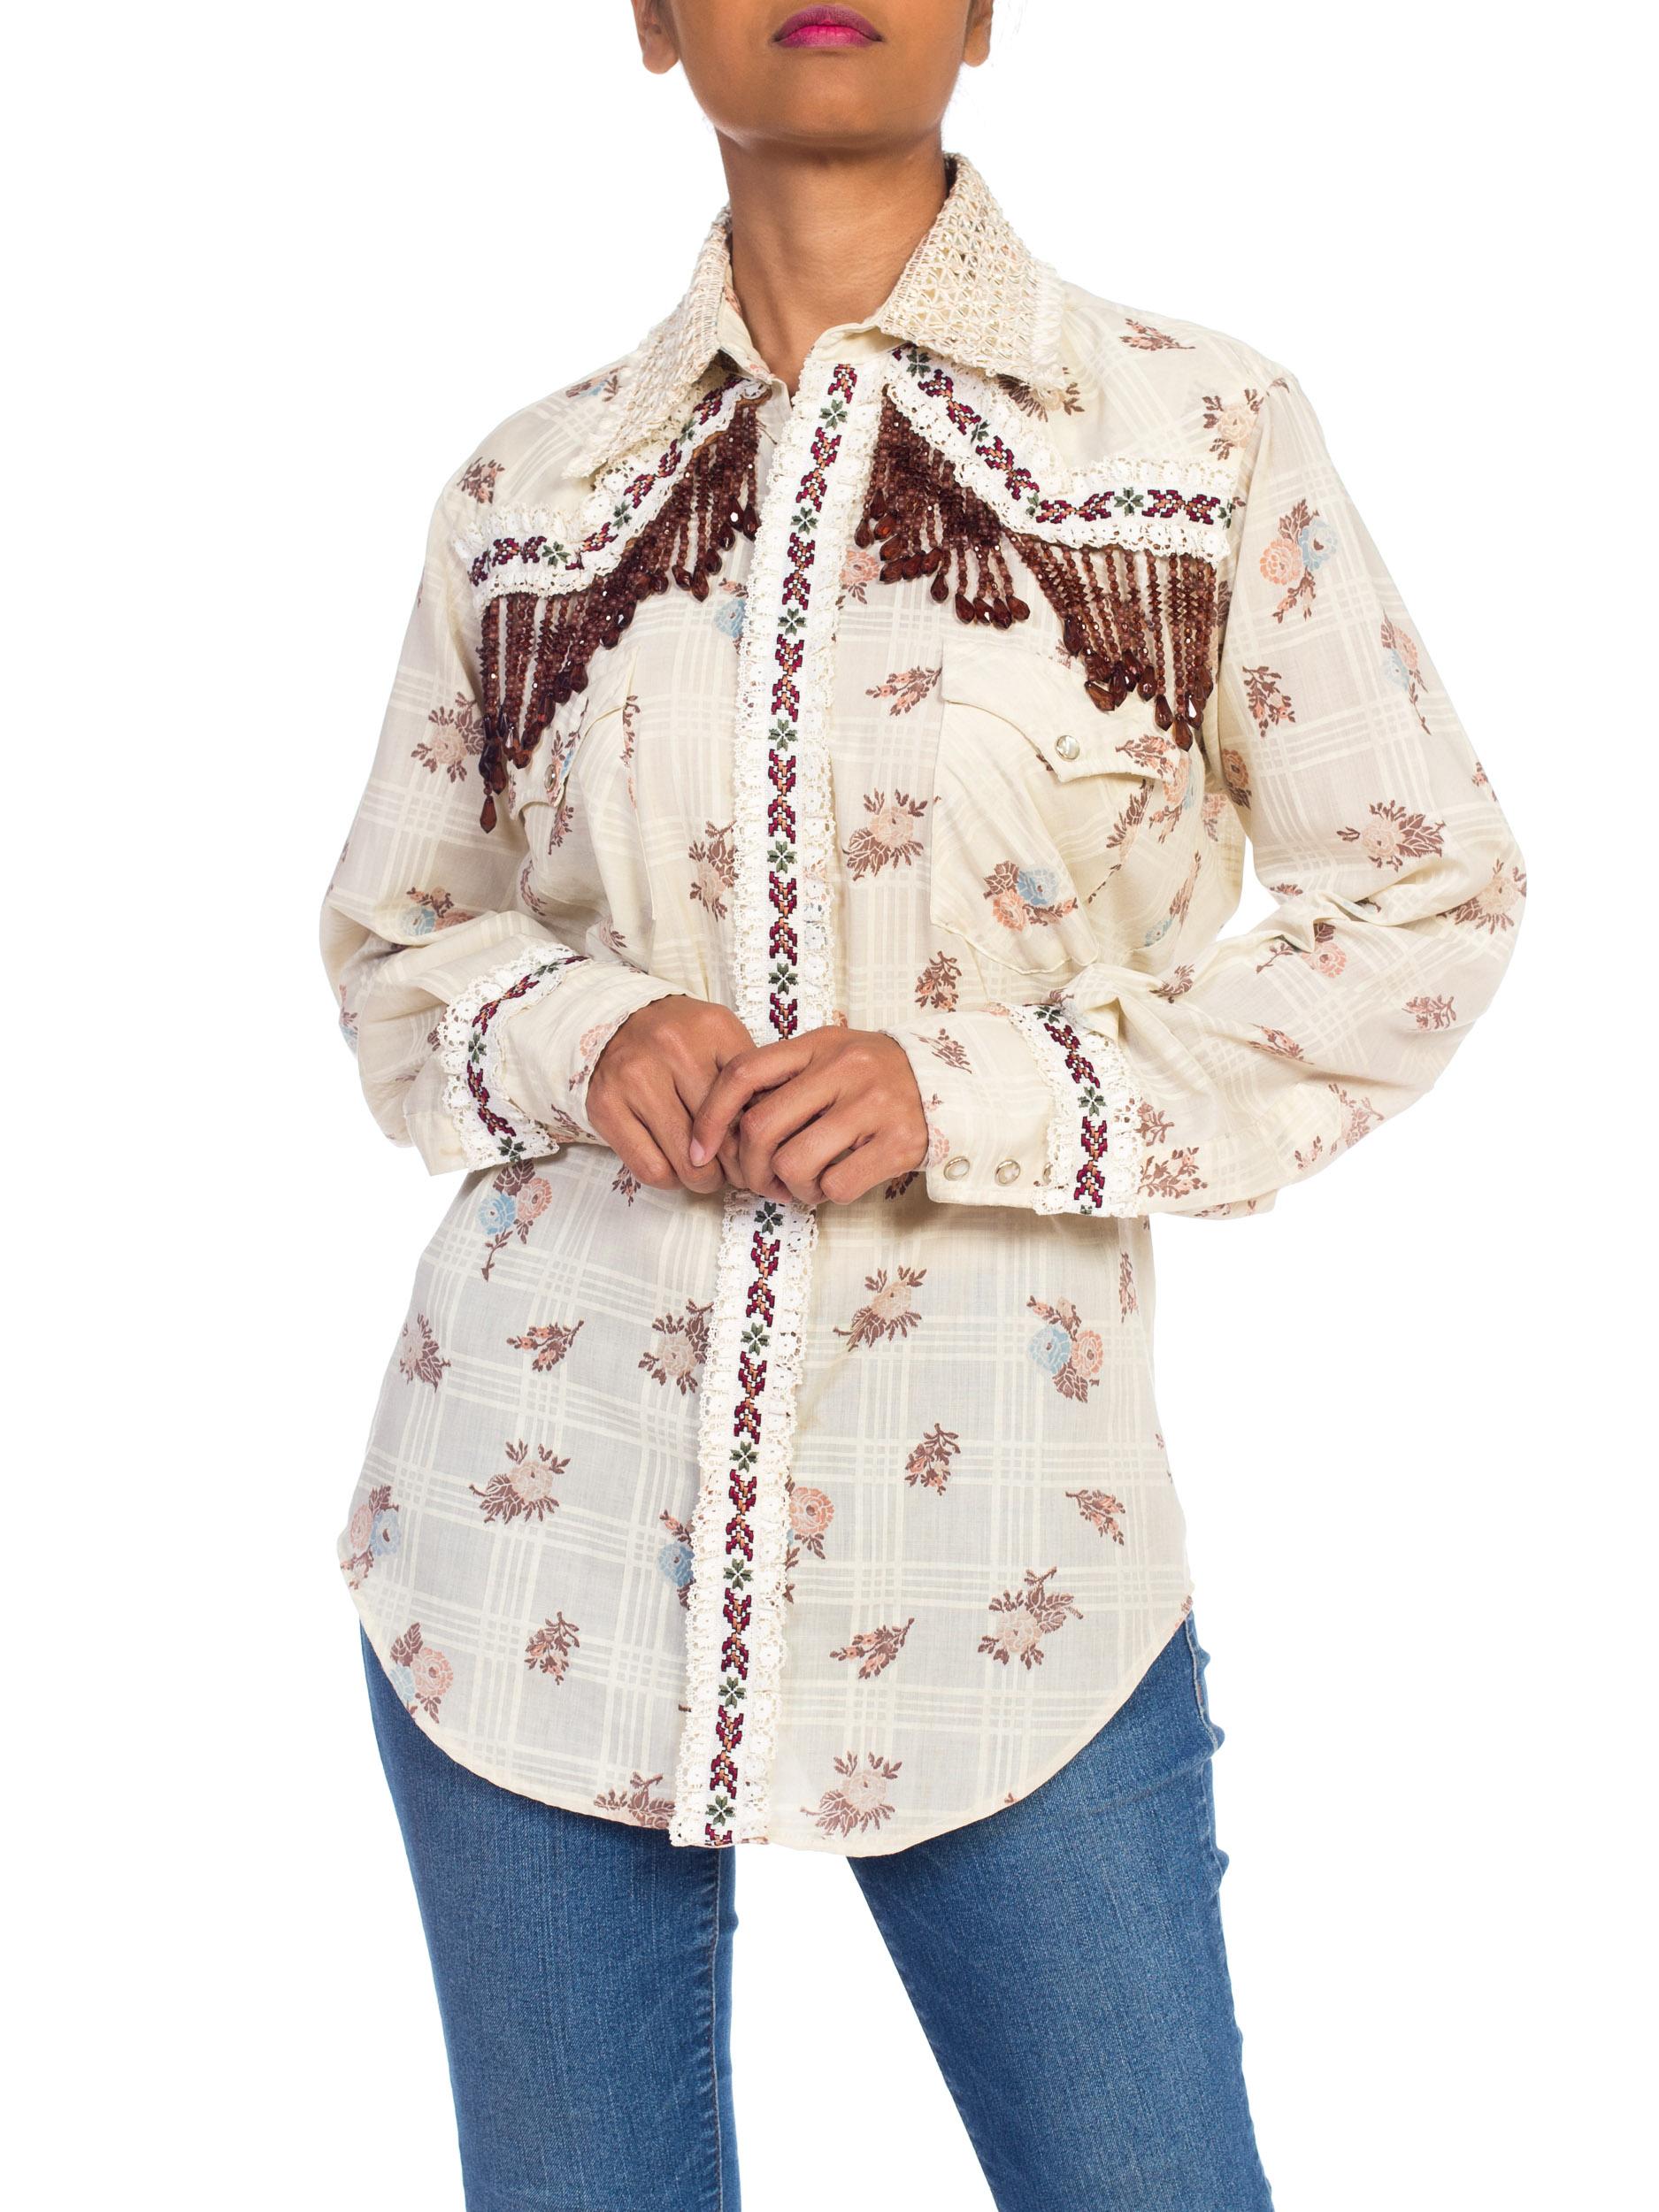 1970s Wrangler Floral Print Western Top With Lace and Ribbon 8